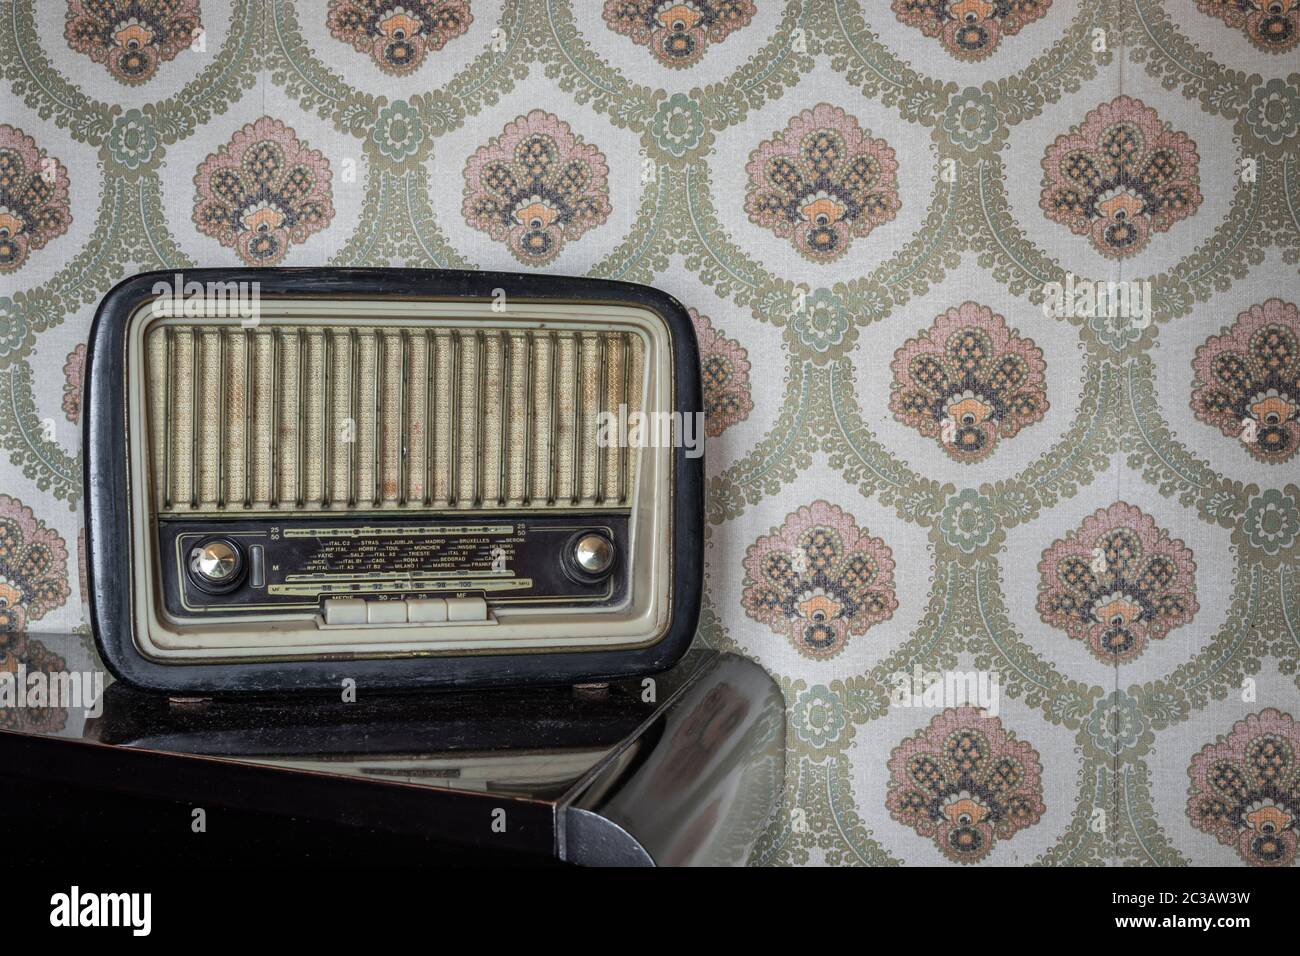 An old transistor radio, with knobs and buttons for manual tuning. In the background a vintage wallpaper. Ancient object, worn and ruined by time. Stock Photo